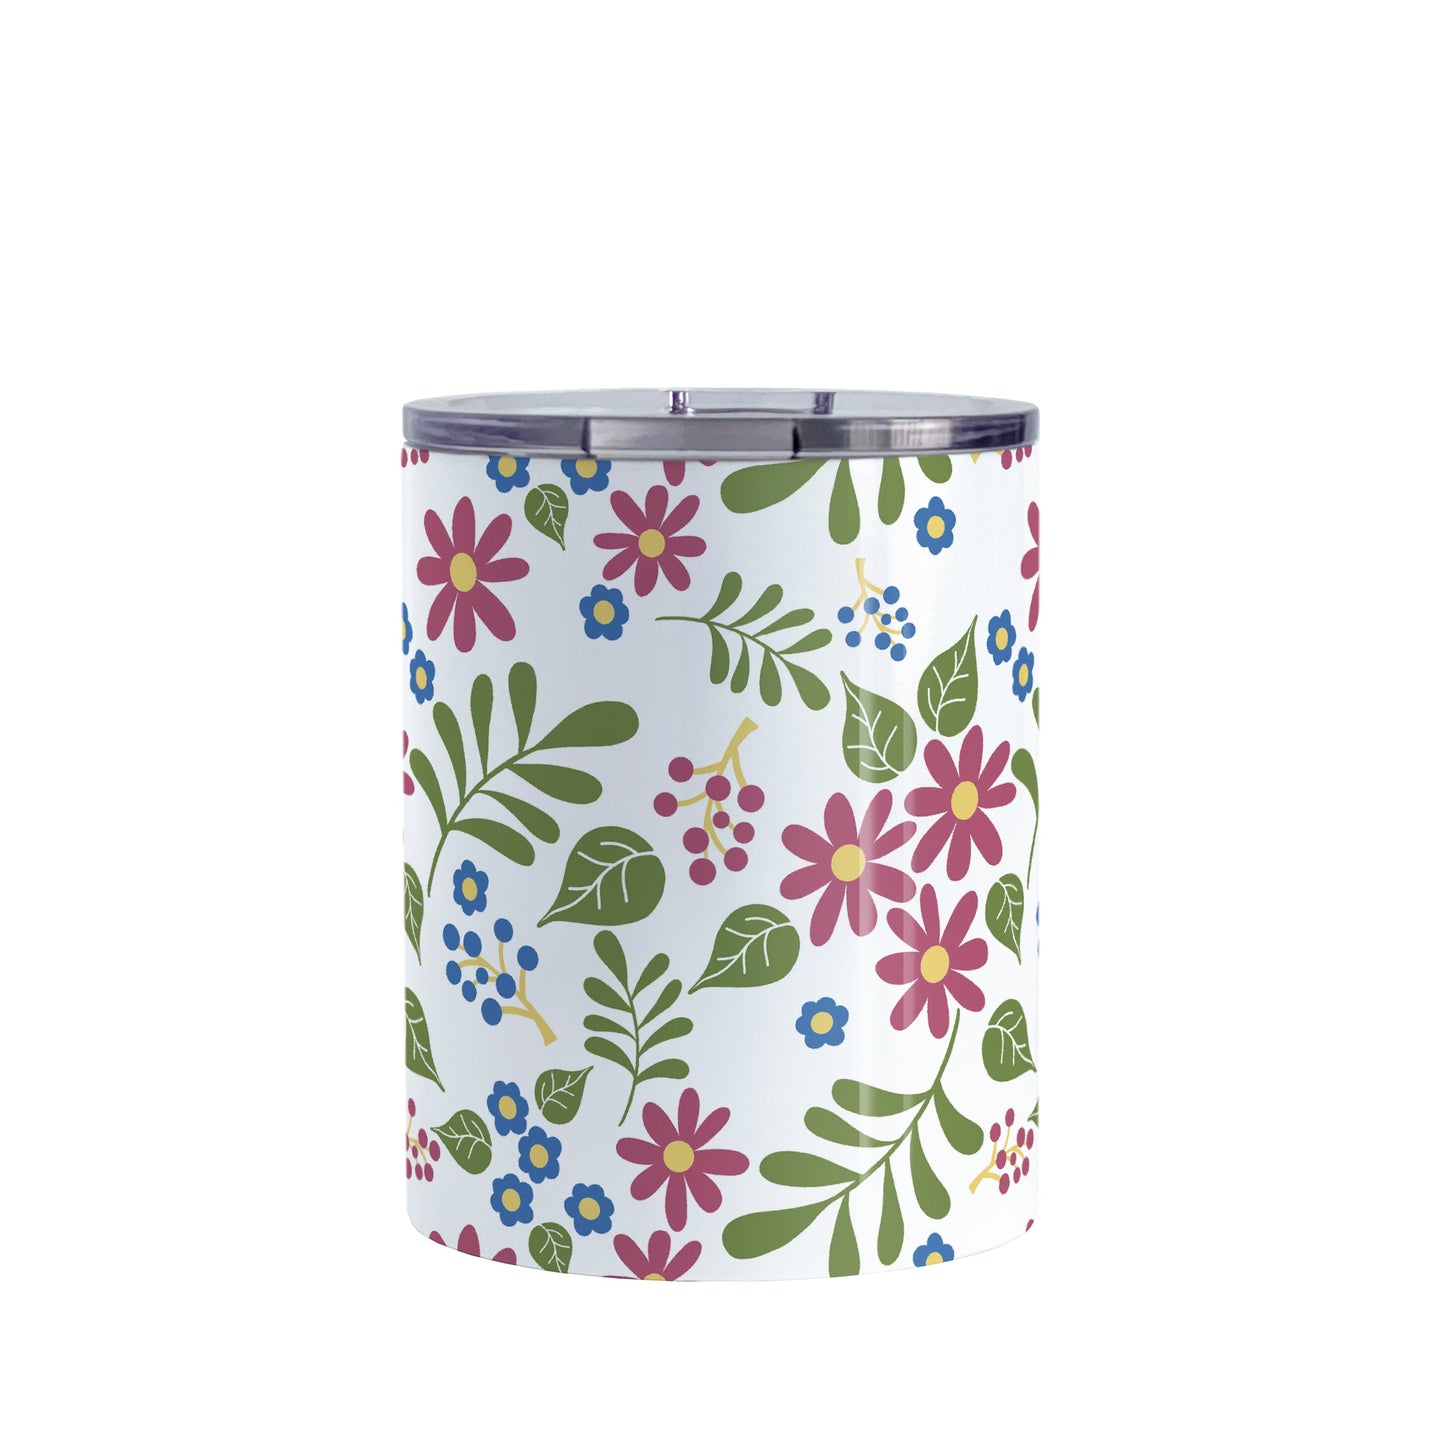 Burgundy Blue Green Flowers Pattern Tumbler Cup (10oz, stainless steel insulated) at Amy's Coffee Mugs